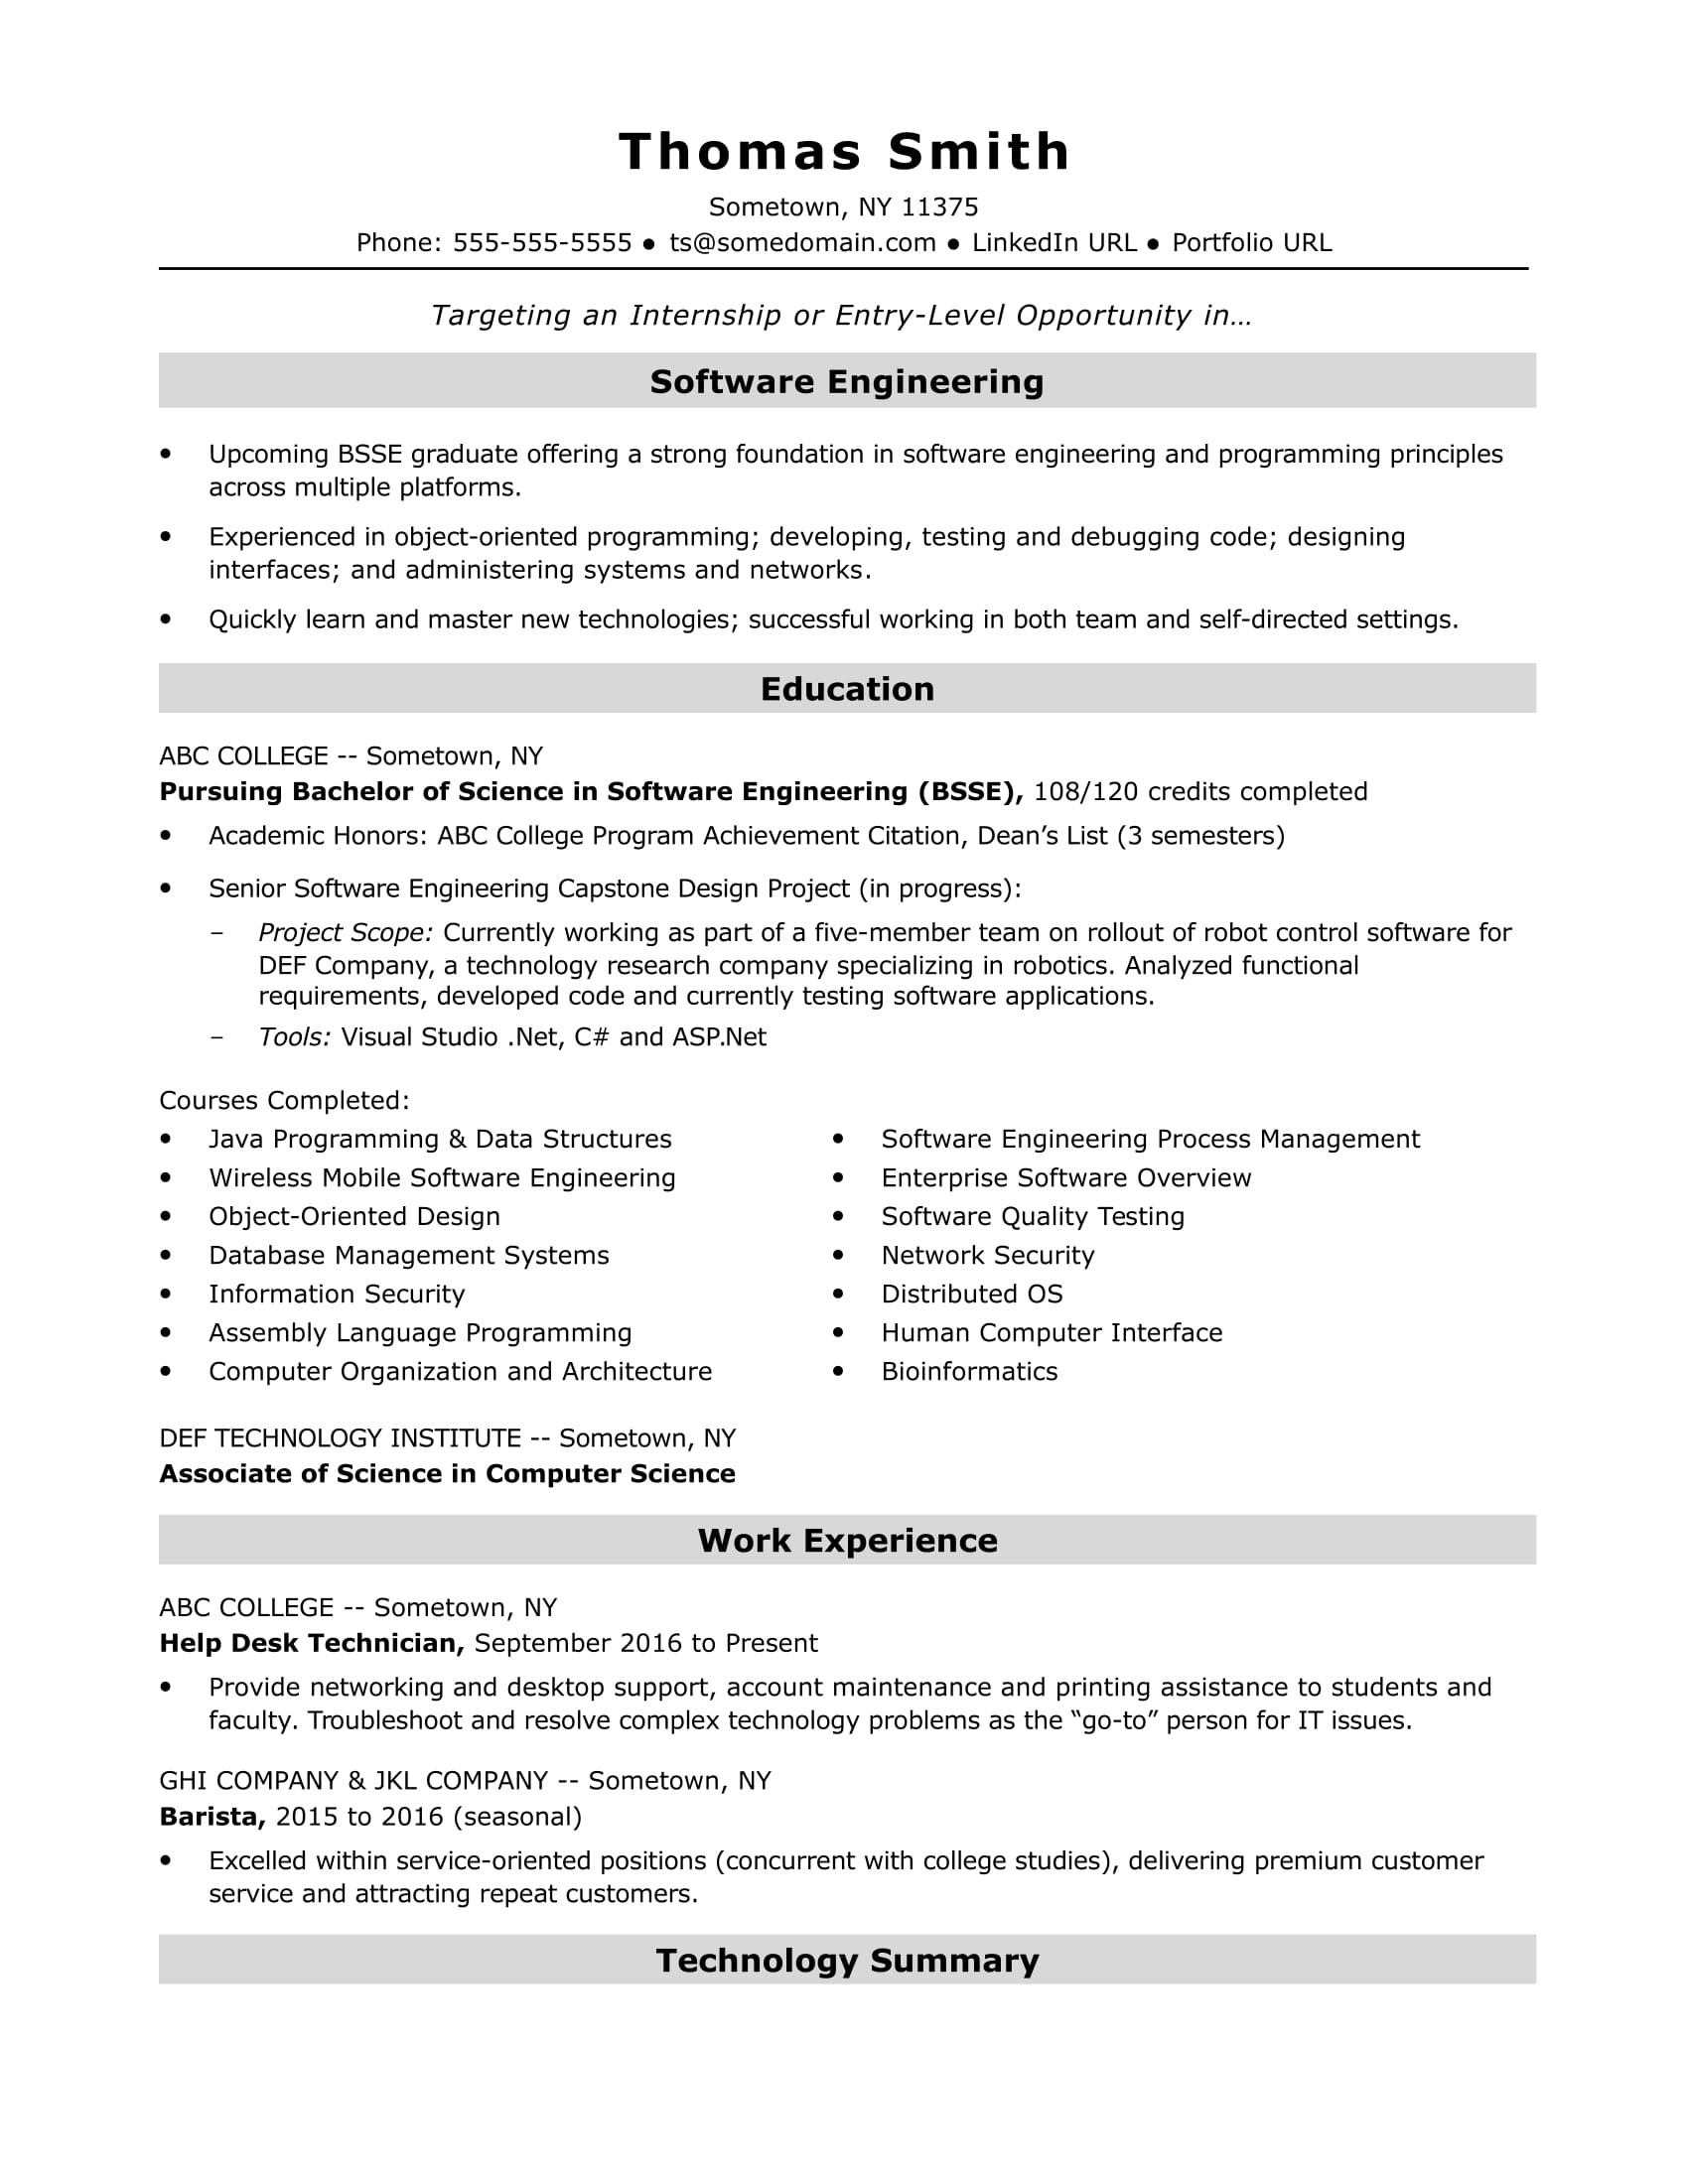 Resume Samples for Entry Level It Positions Entry-level software Engineer Resume Sample Monster.com